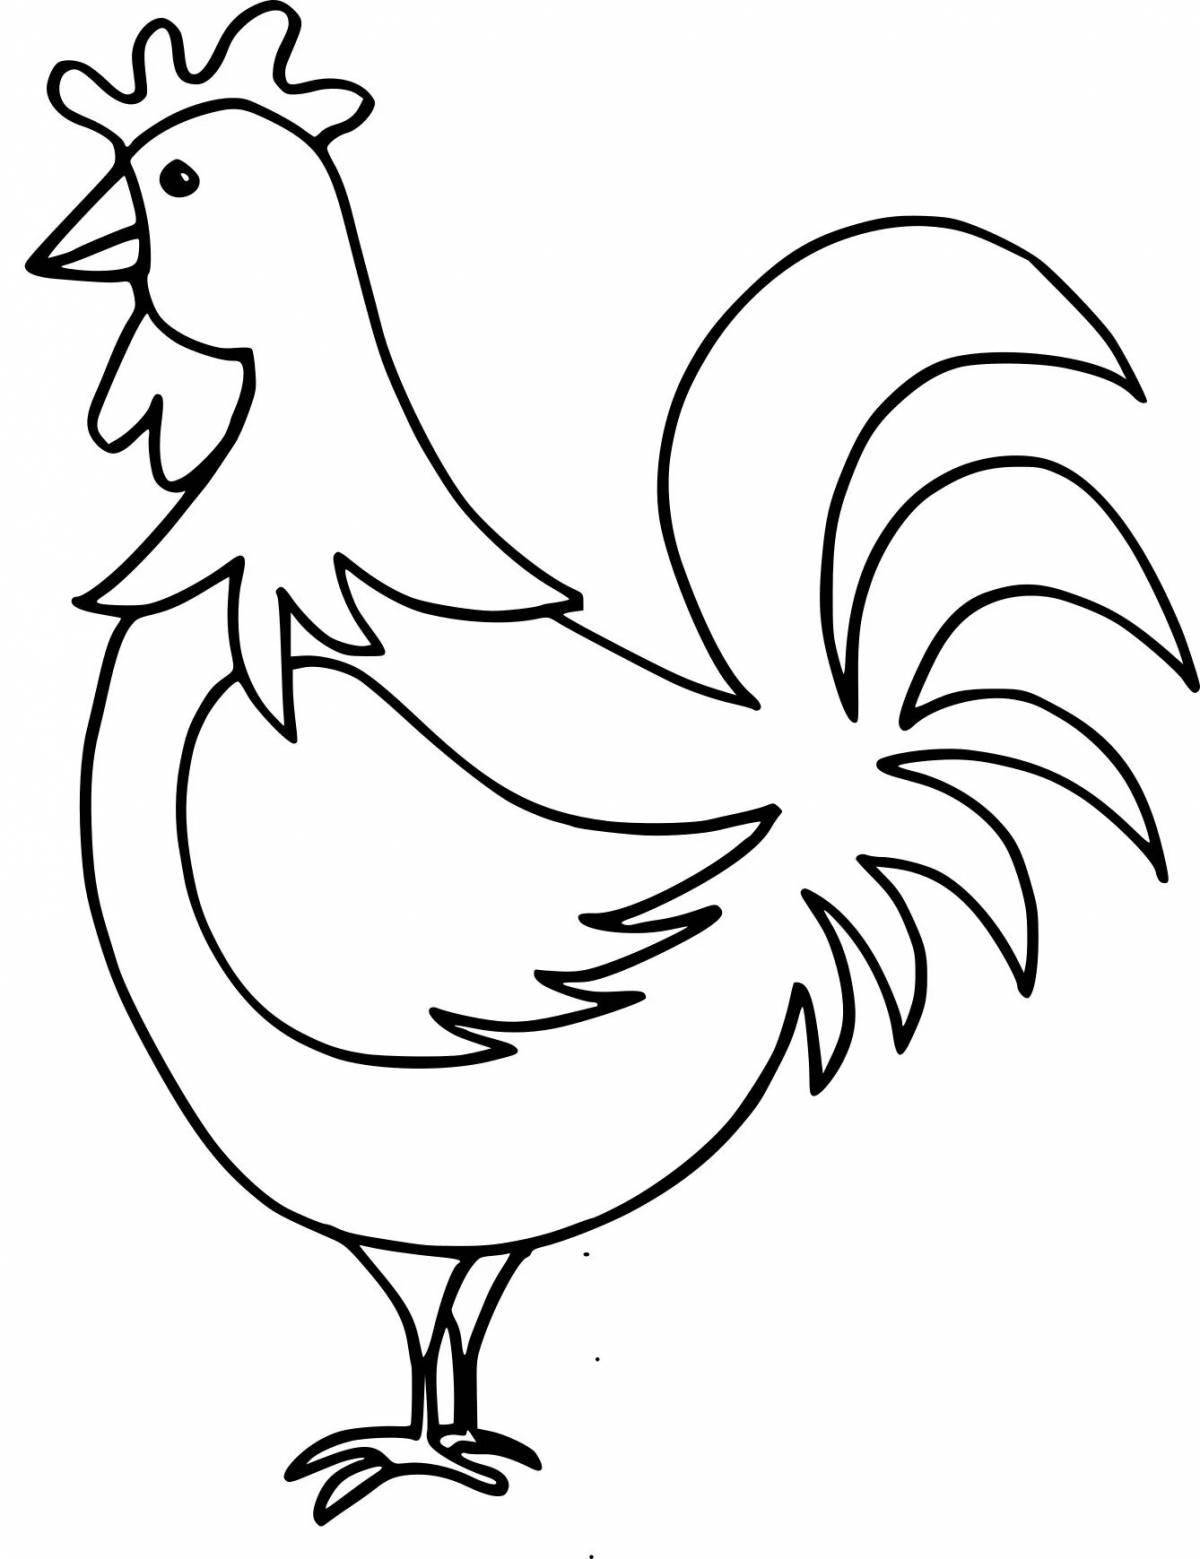 Innovative rooster coloring book for 4-5 year olds